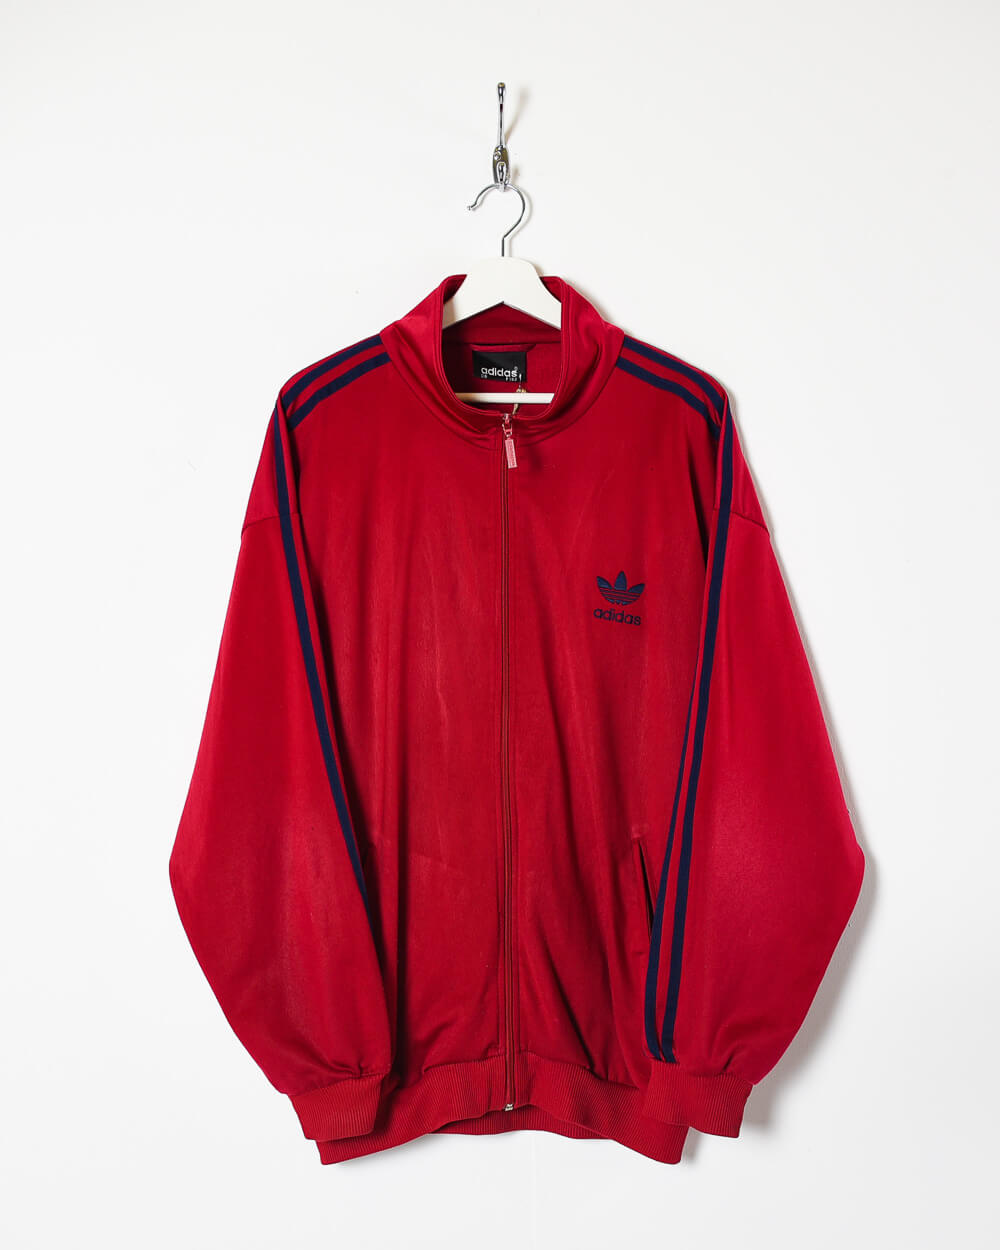 Red Adidas Tracksuit Top - X-Large